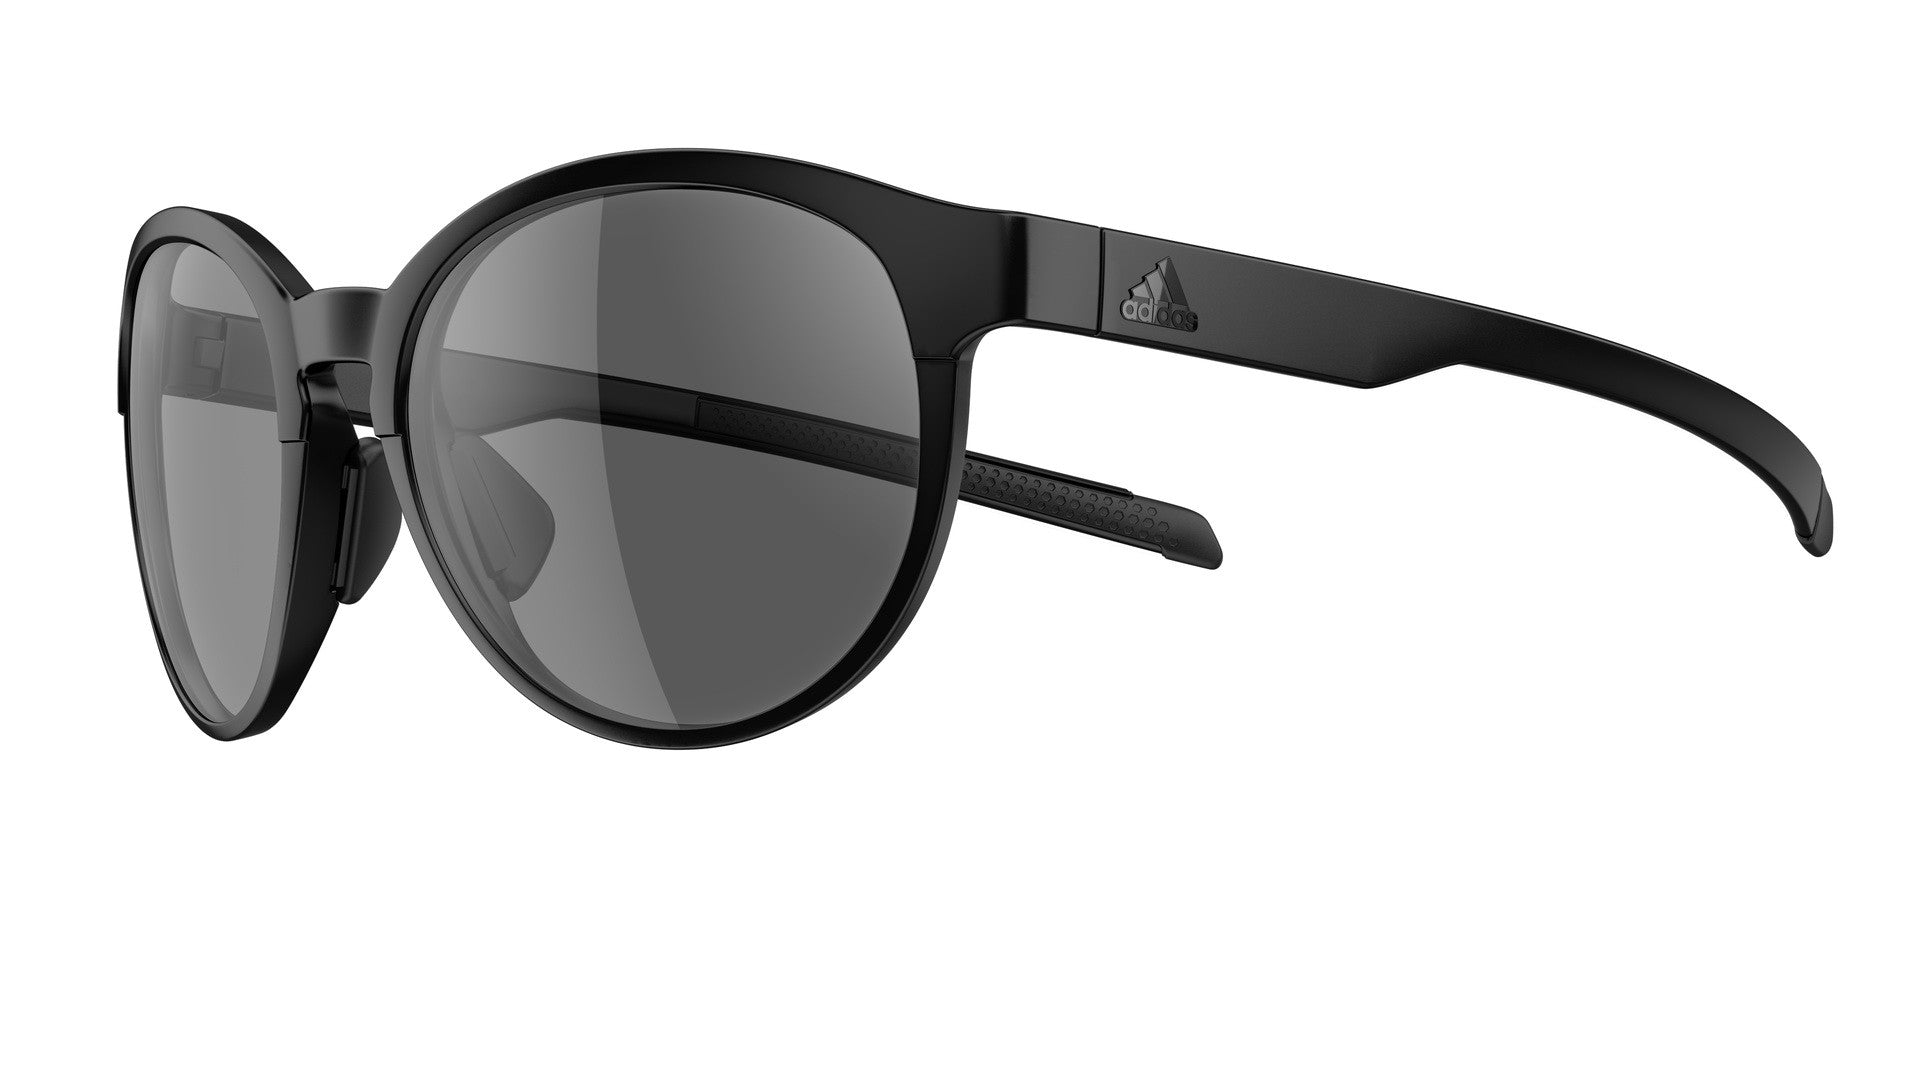 Silhouette Beyonder Sunglasses AD31 rx chassis